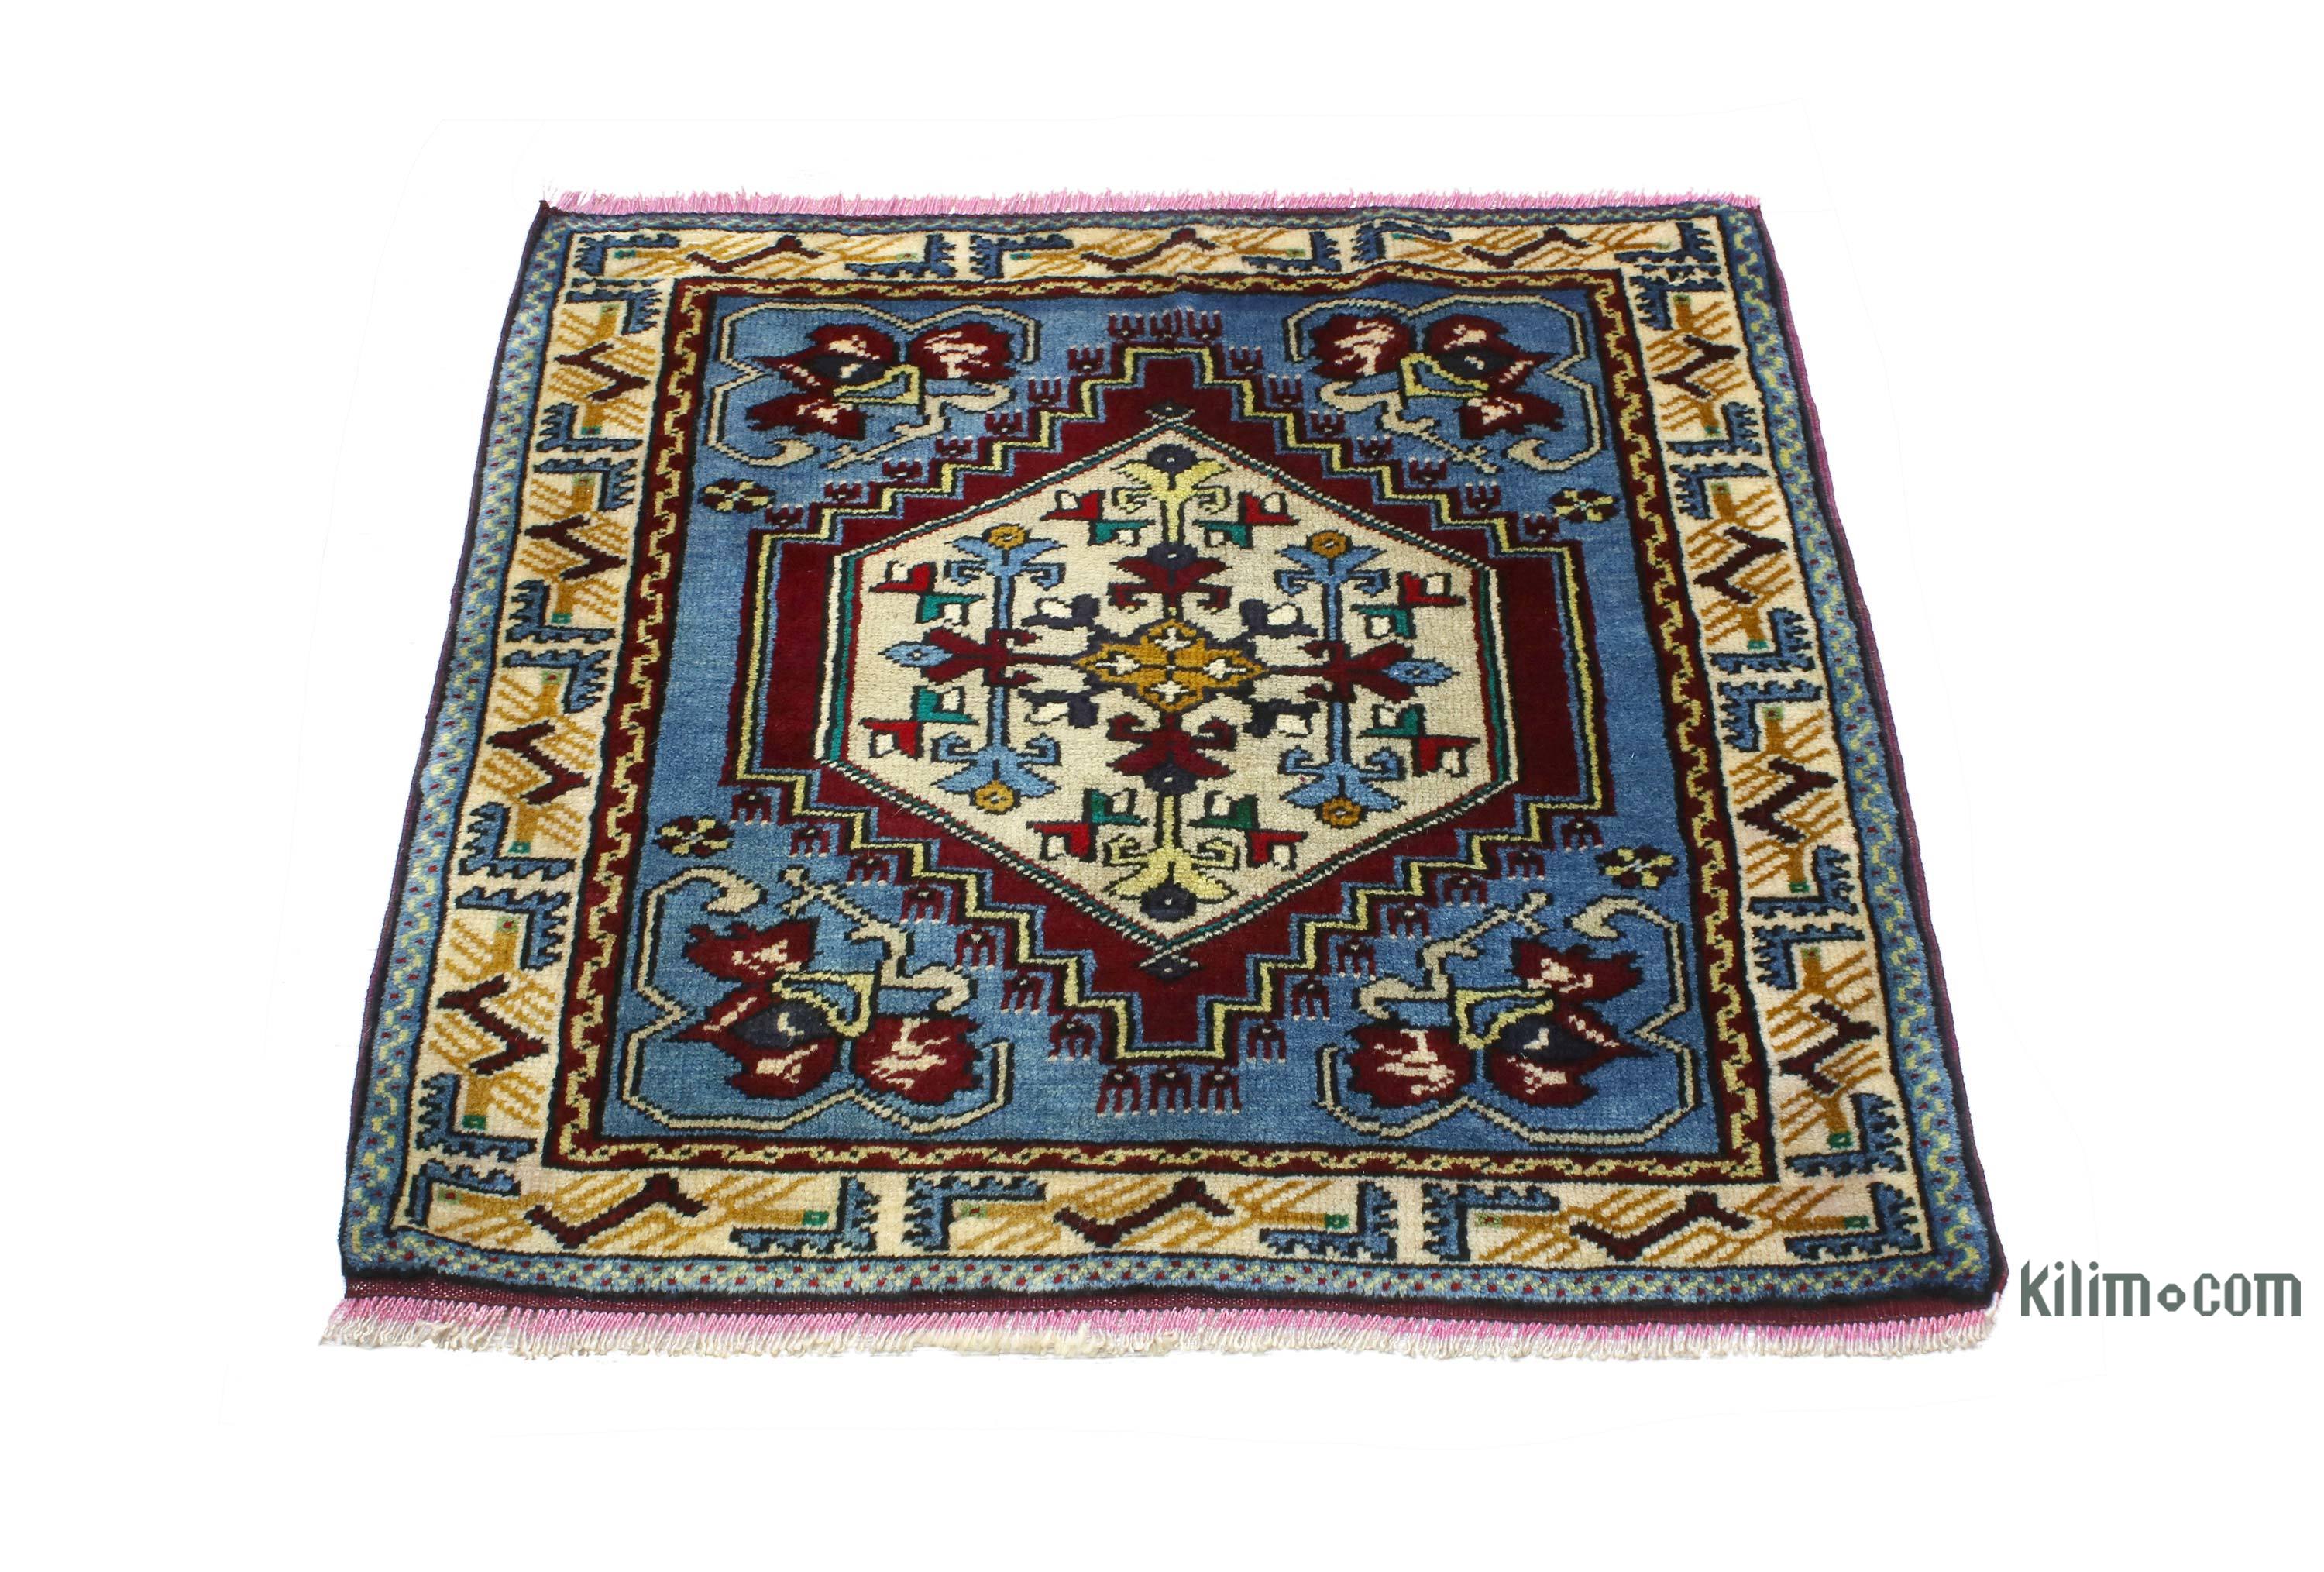 K0062696 Vintage Turkish Hand-Knotted Rug - 2' 4 x 3' 5 (28 x 41)  The  Source for Vintage Rugs, Tribal Kilim Rugs, Wool Turkish Rugs, Overdyed  Persian Rugs, Runner Rugs, Patchwork